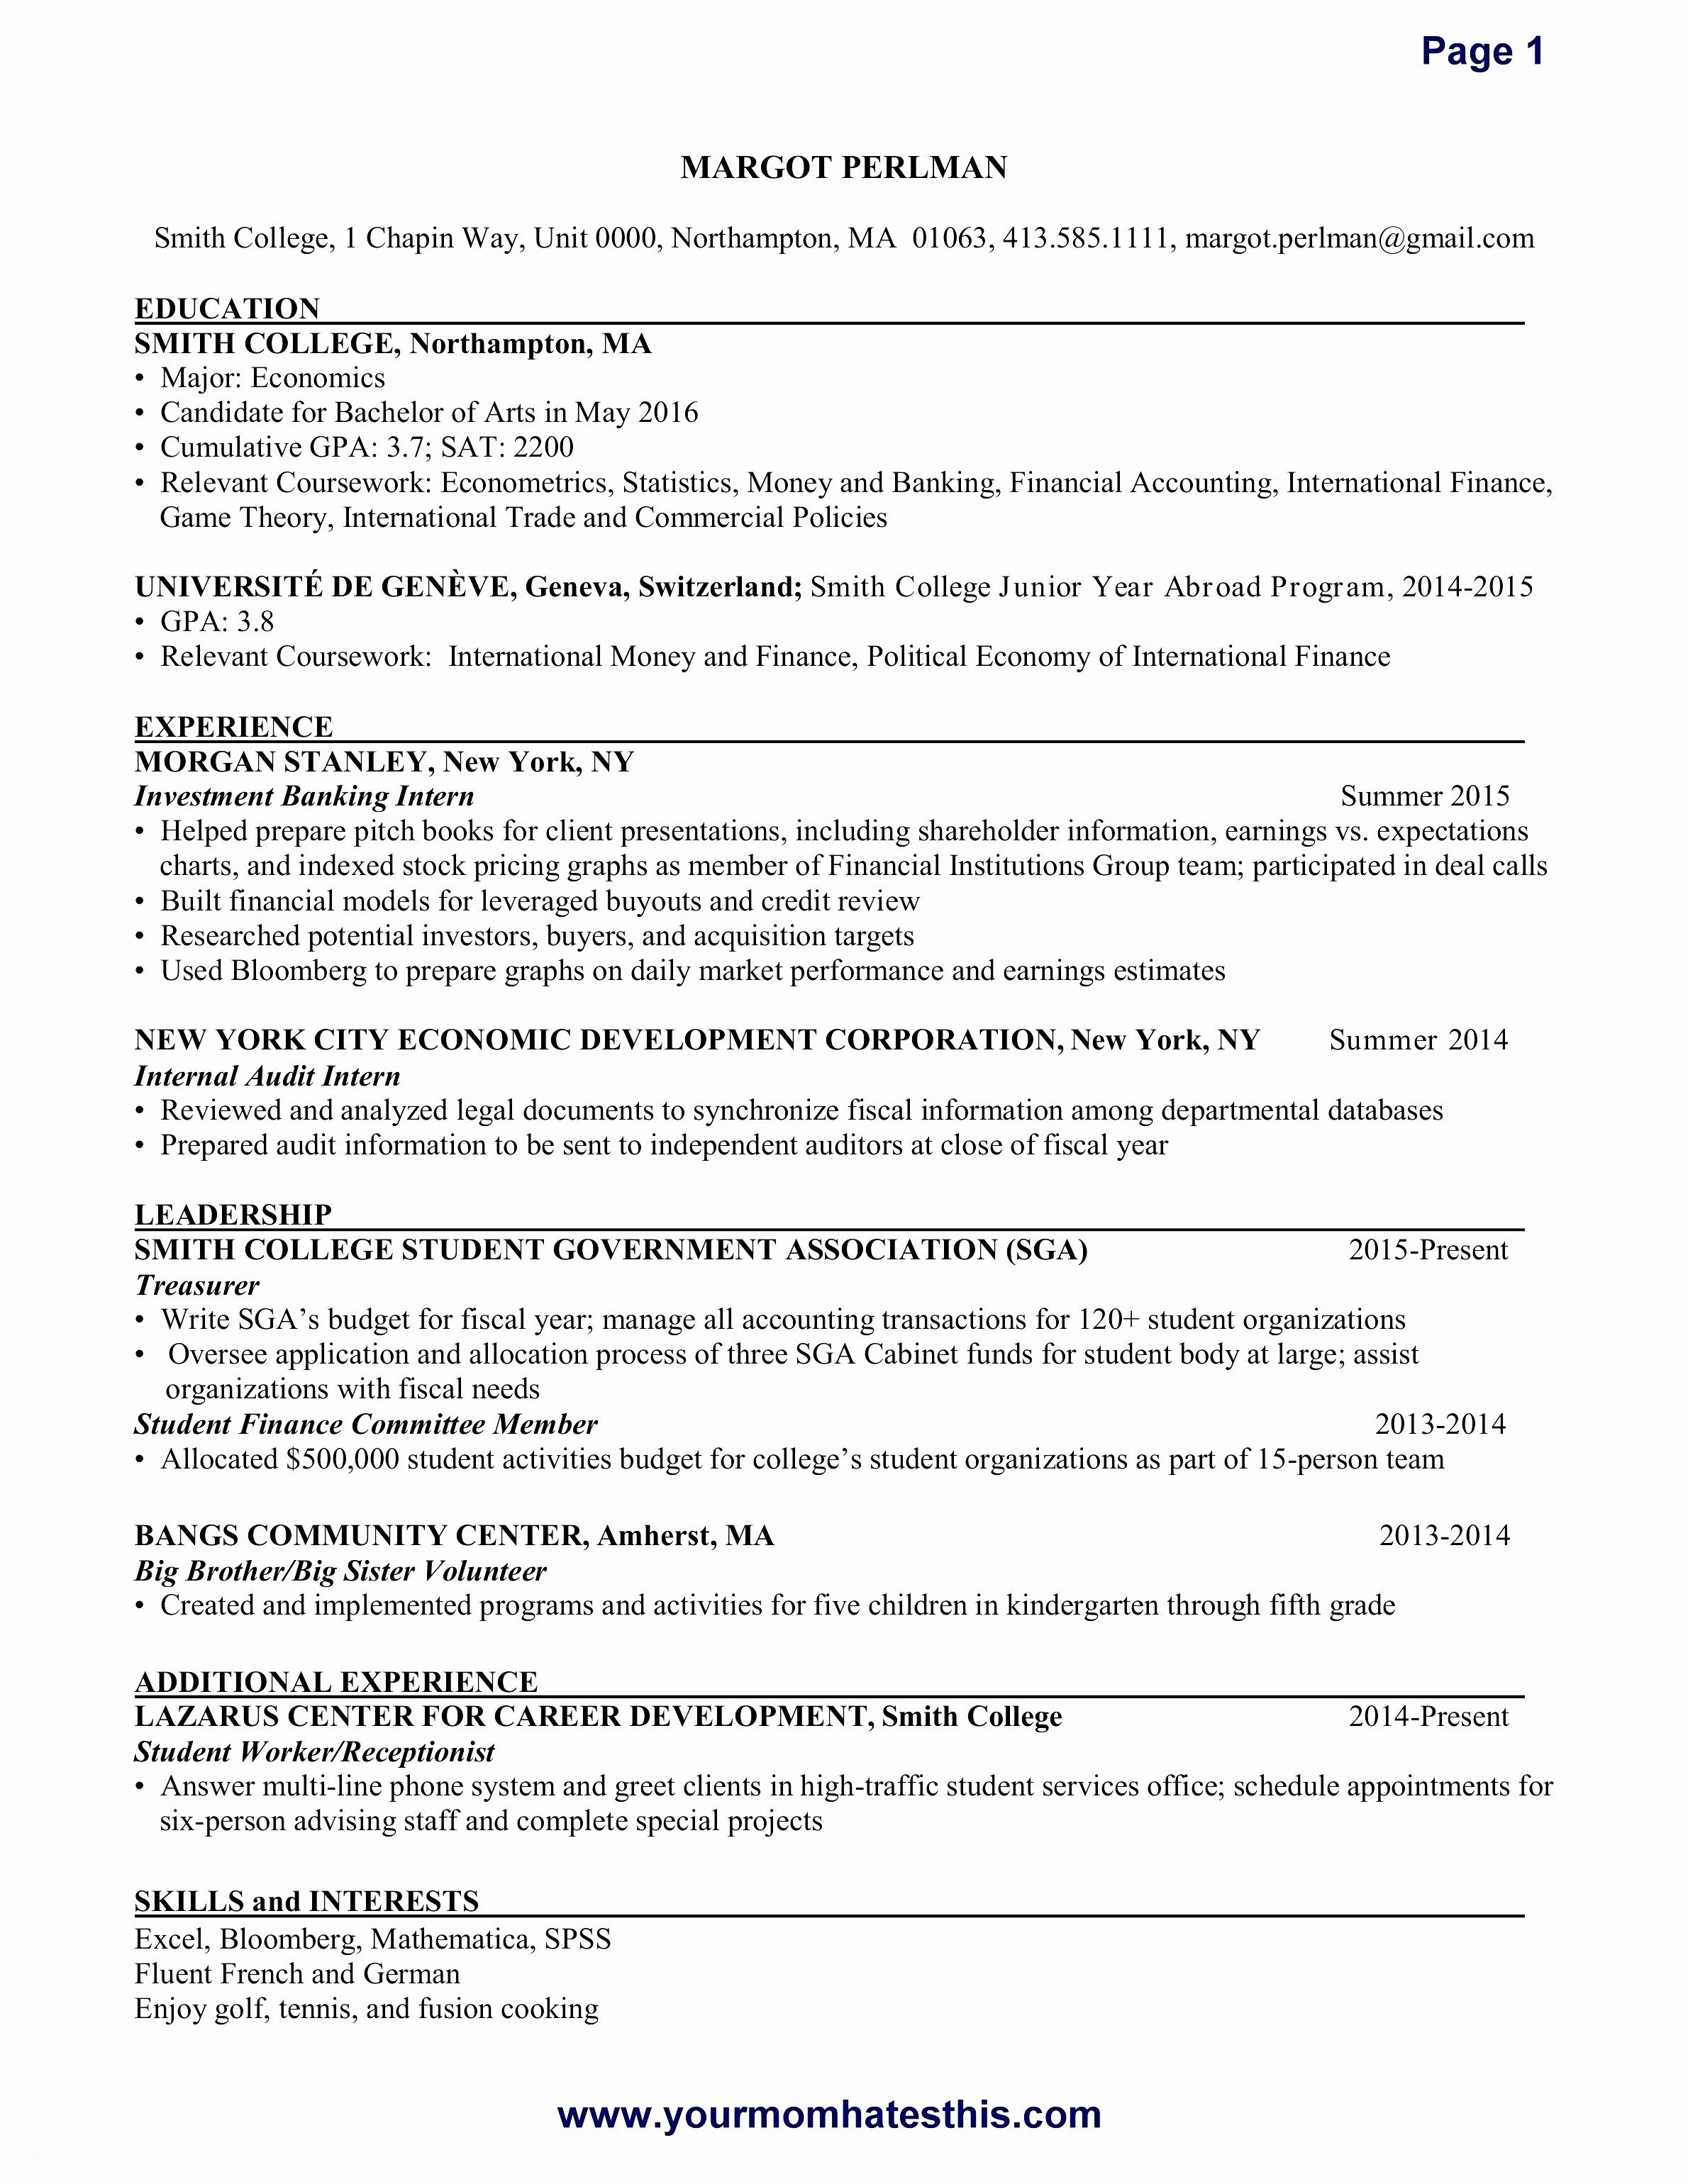 Free Letter Template Word - Resume Ms Word Roddyschrock